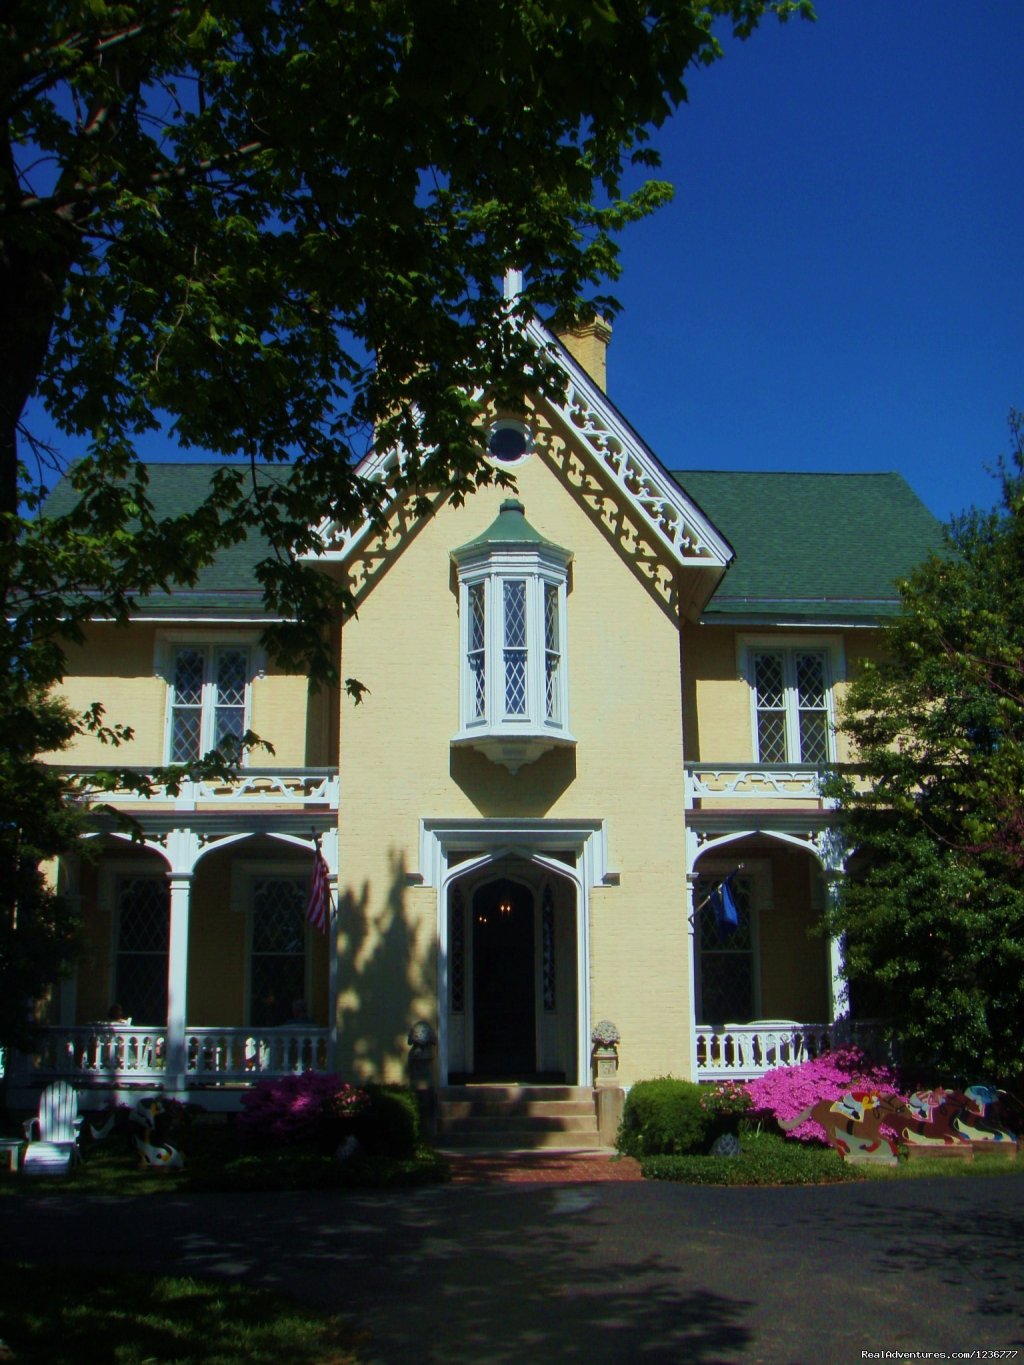 Spring at the Inn at Woodhaven | Inn at Woodhaven a Romantic Bed and Breakfast i | Image #8/10 | 